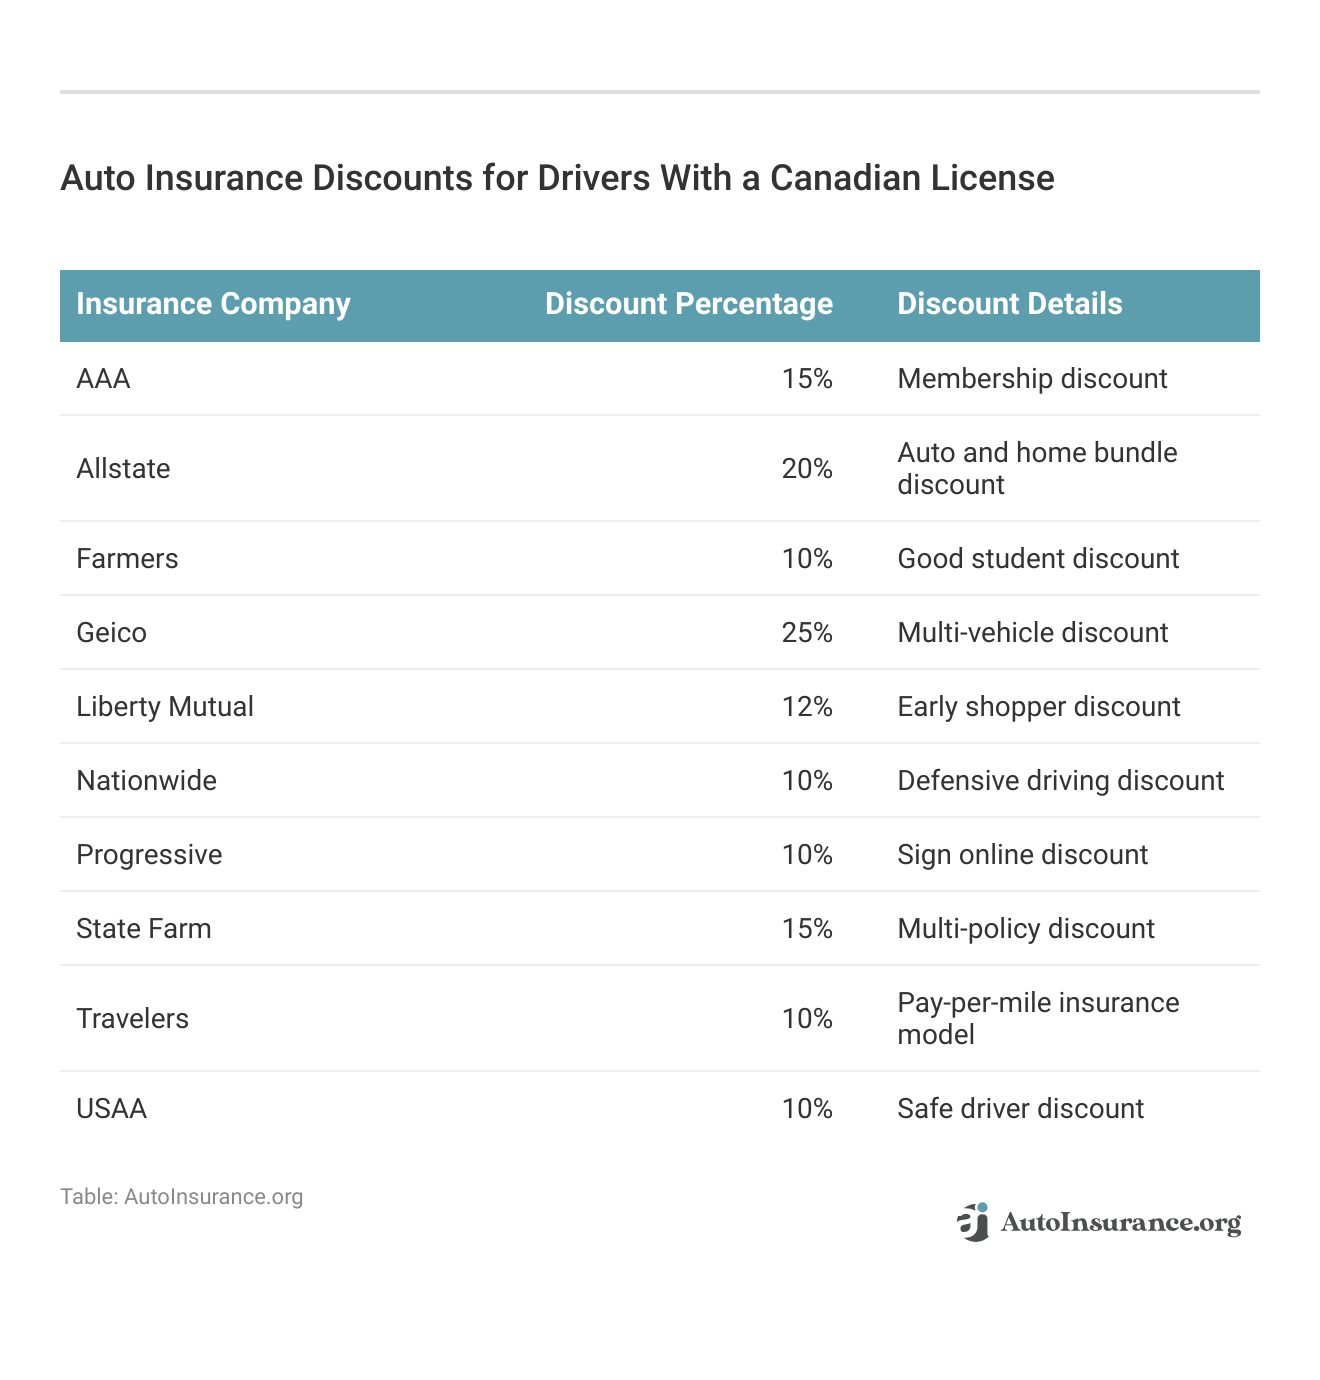 <h3>Auto Insurance Discounts for Drivers With a Canadian License</h3>